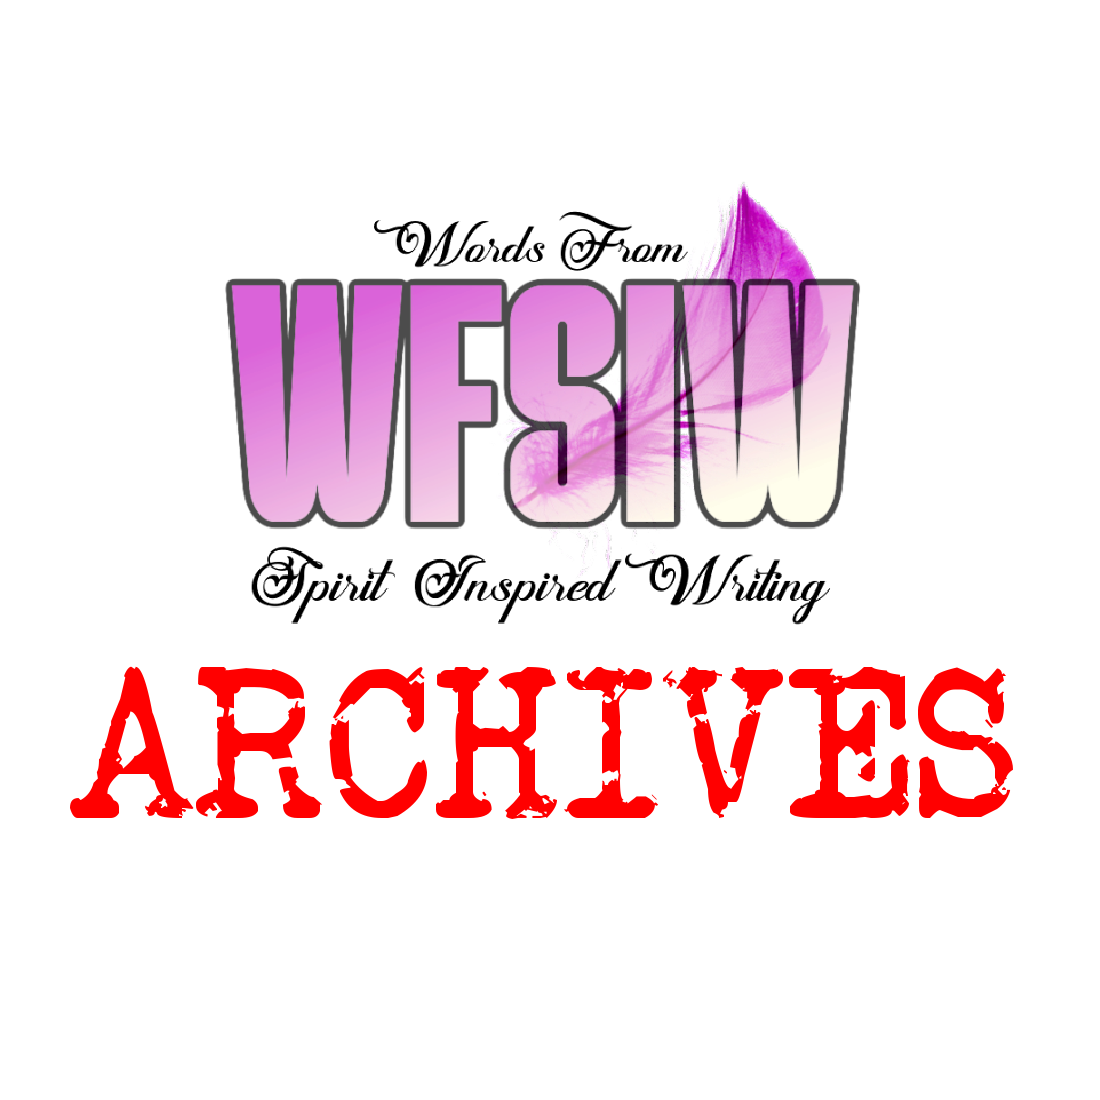 From The WFSIW Archives